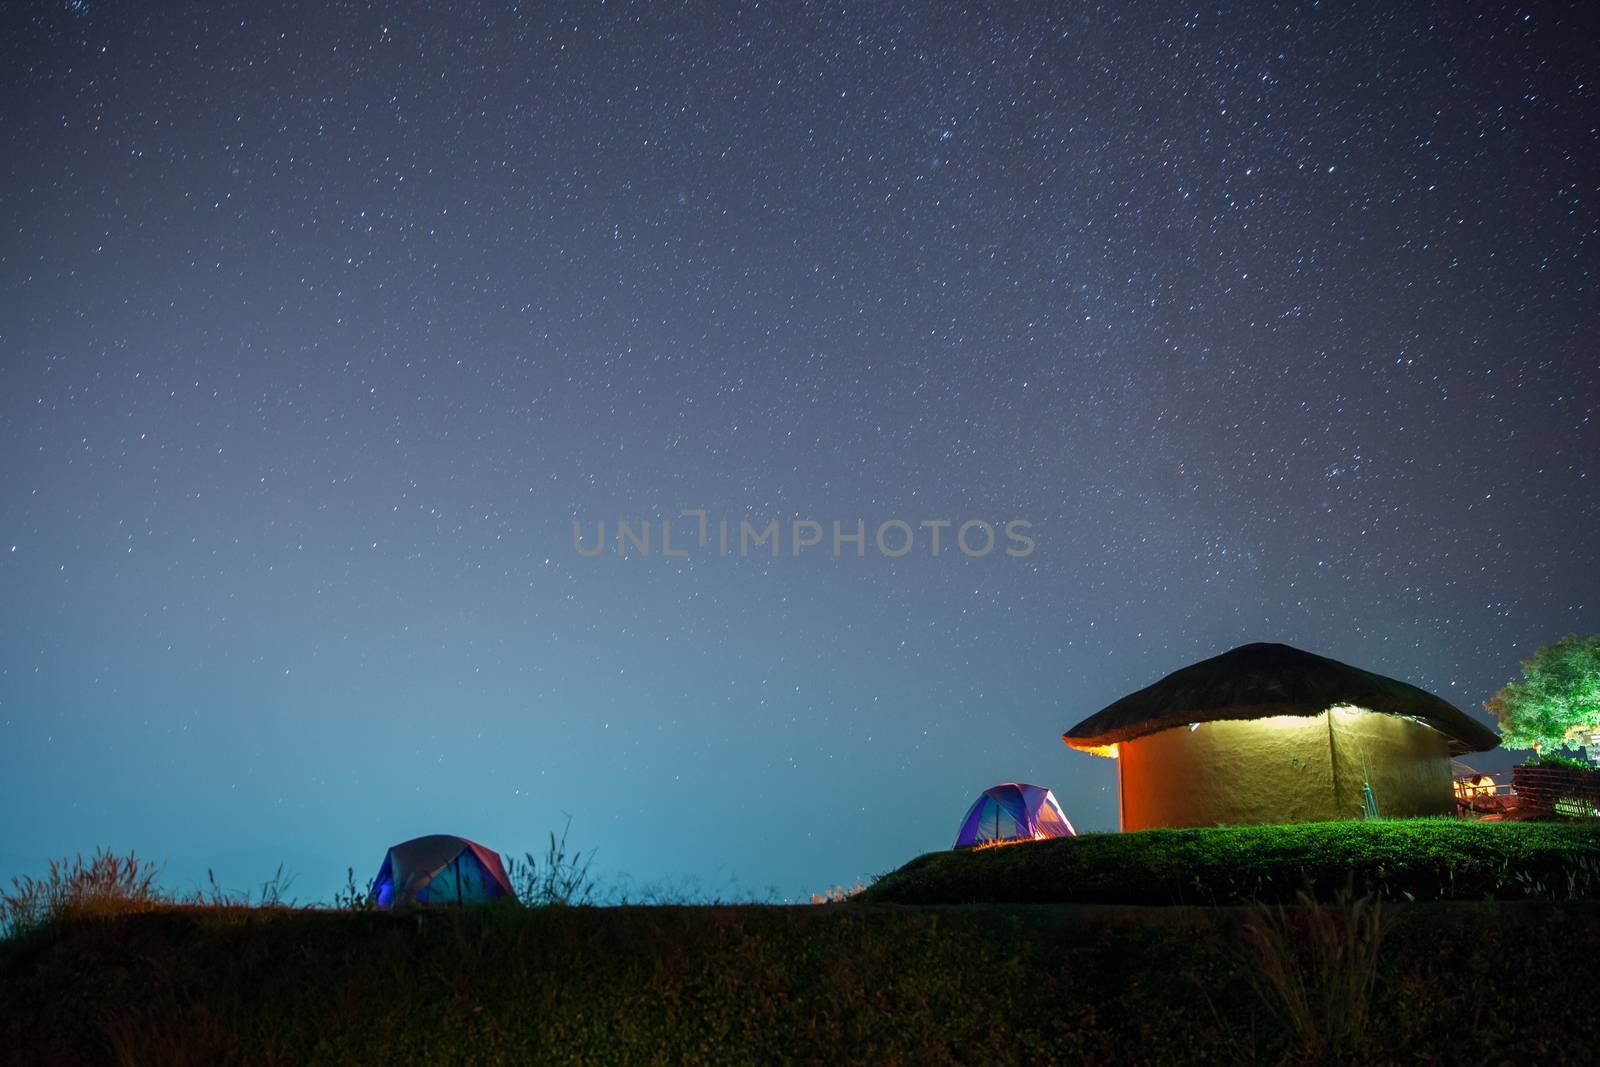 Milkyway and star with camping tent at night time